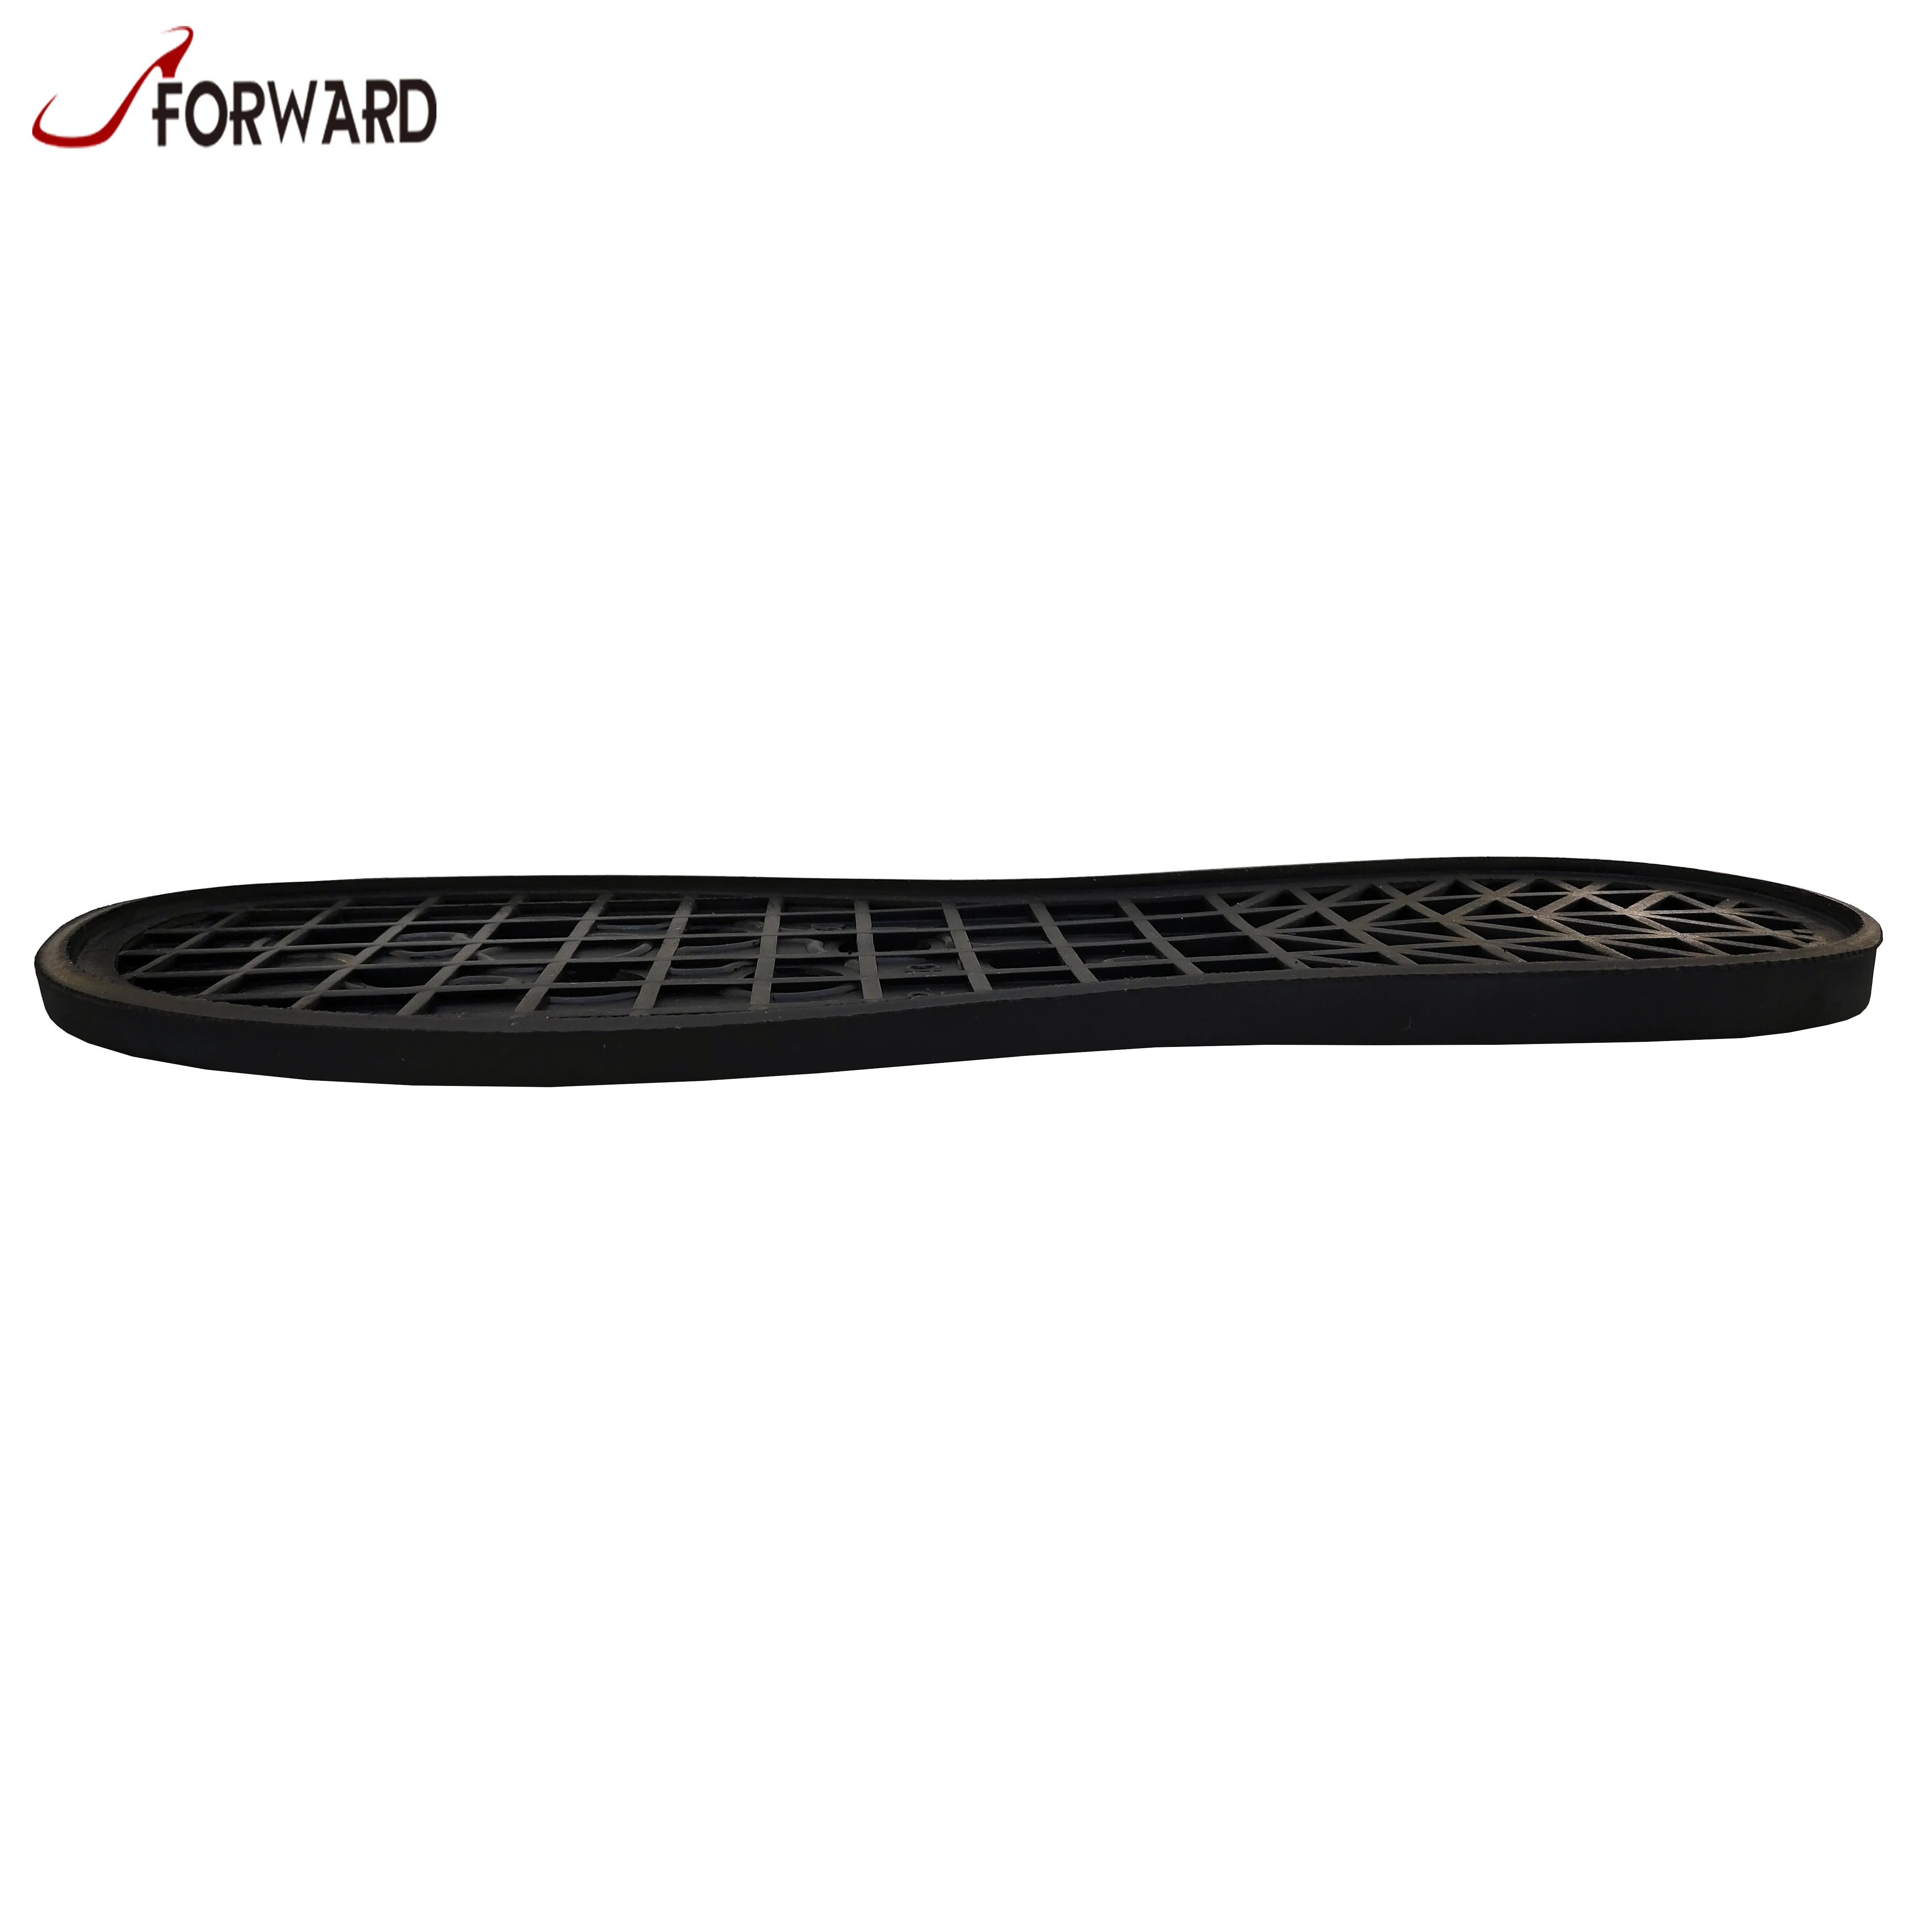 MAN SHOE  SOLE FOR SANDAL AND SLIPPER  GOOD DESIGN  RUBBER SOLES FOR SALE